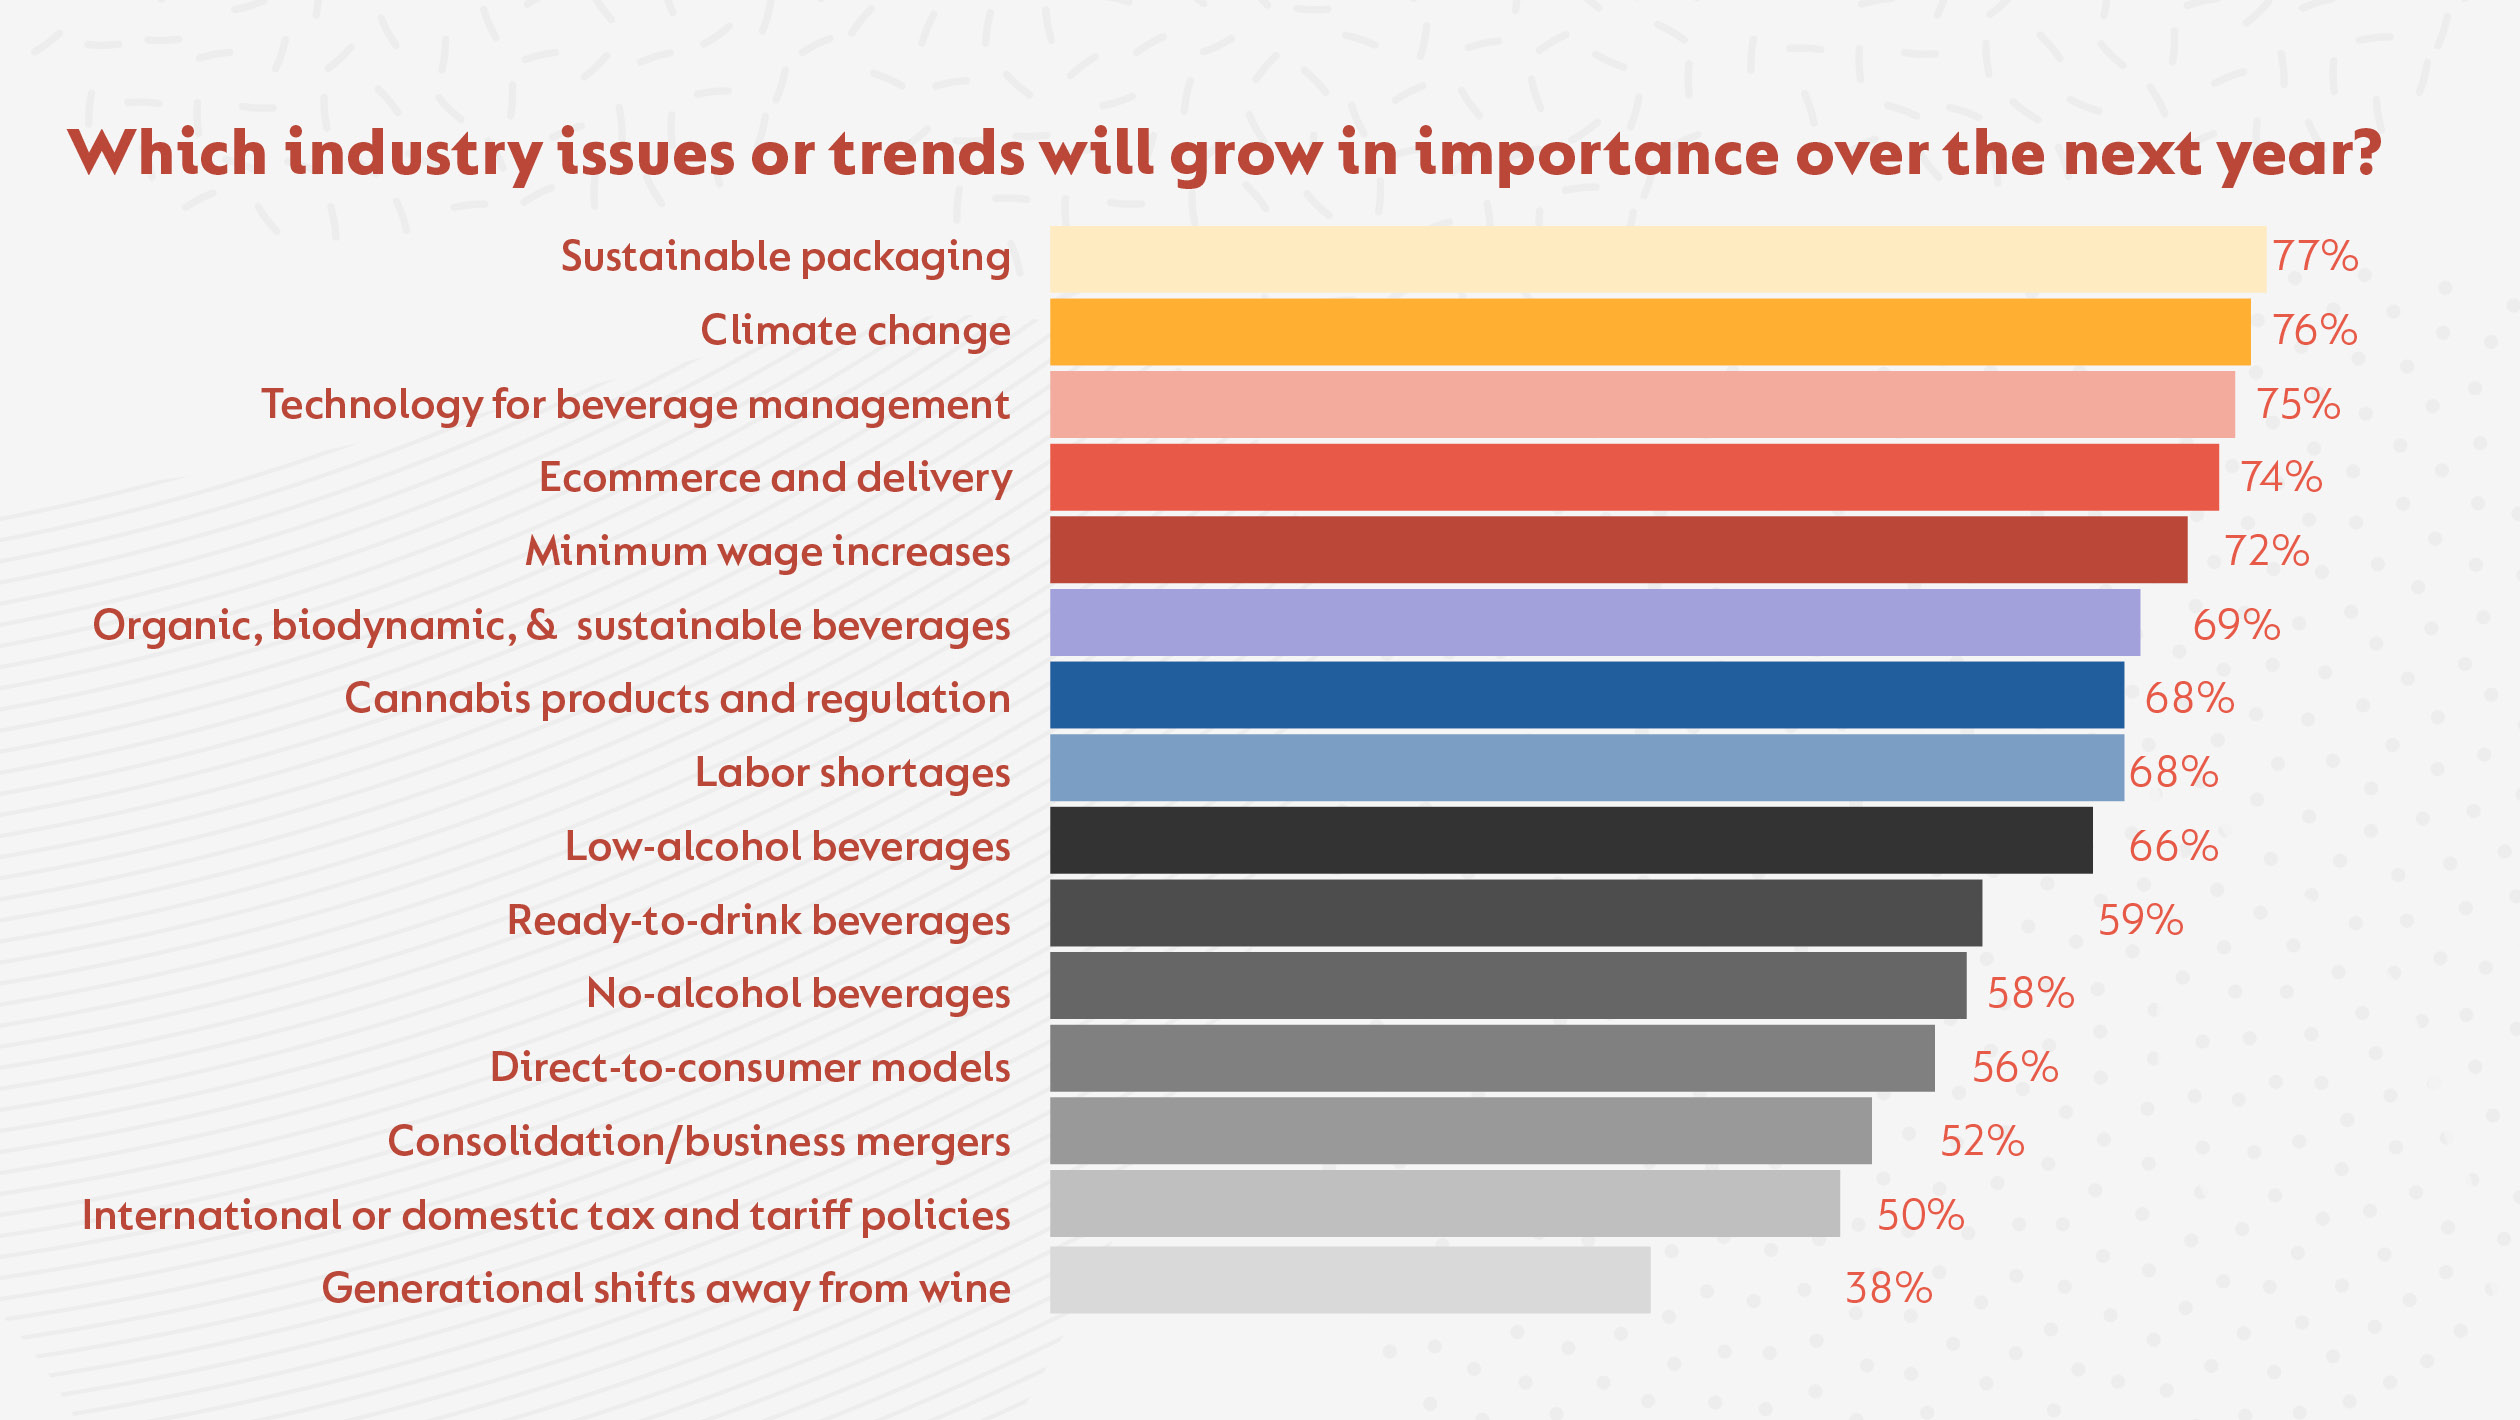 Bar chart shows respondents have major concerns with future industry development as it relates to sustainable packaging, climate change, and technology